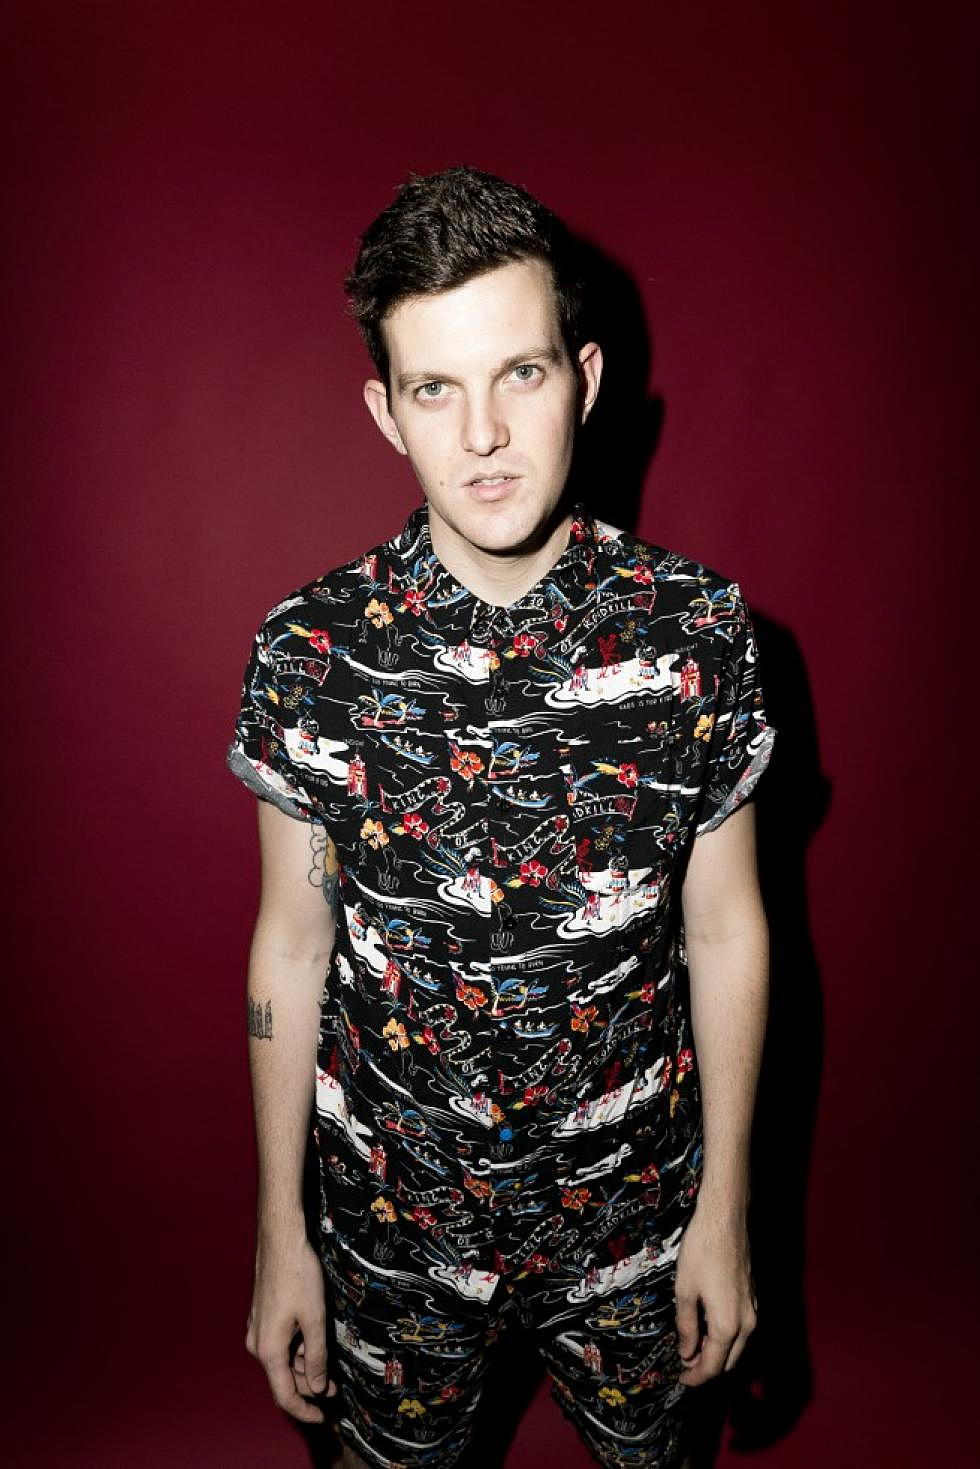 elektro exclusive interview with Dillon Francis